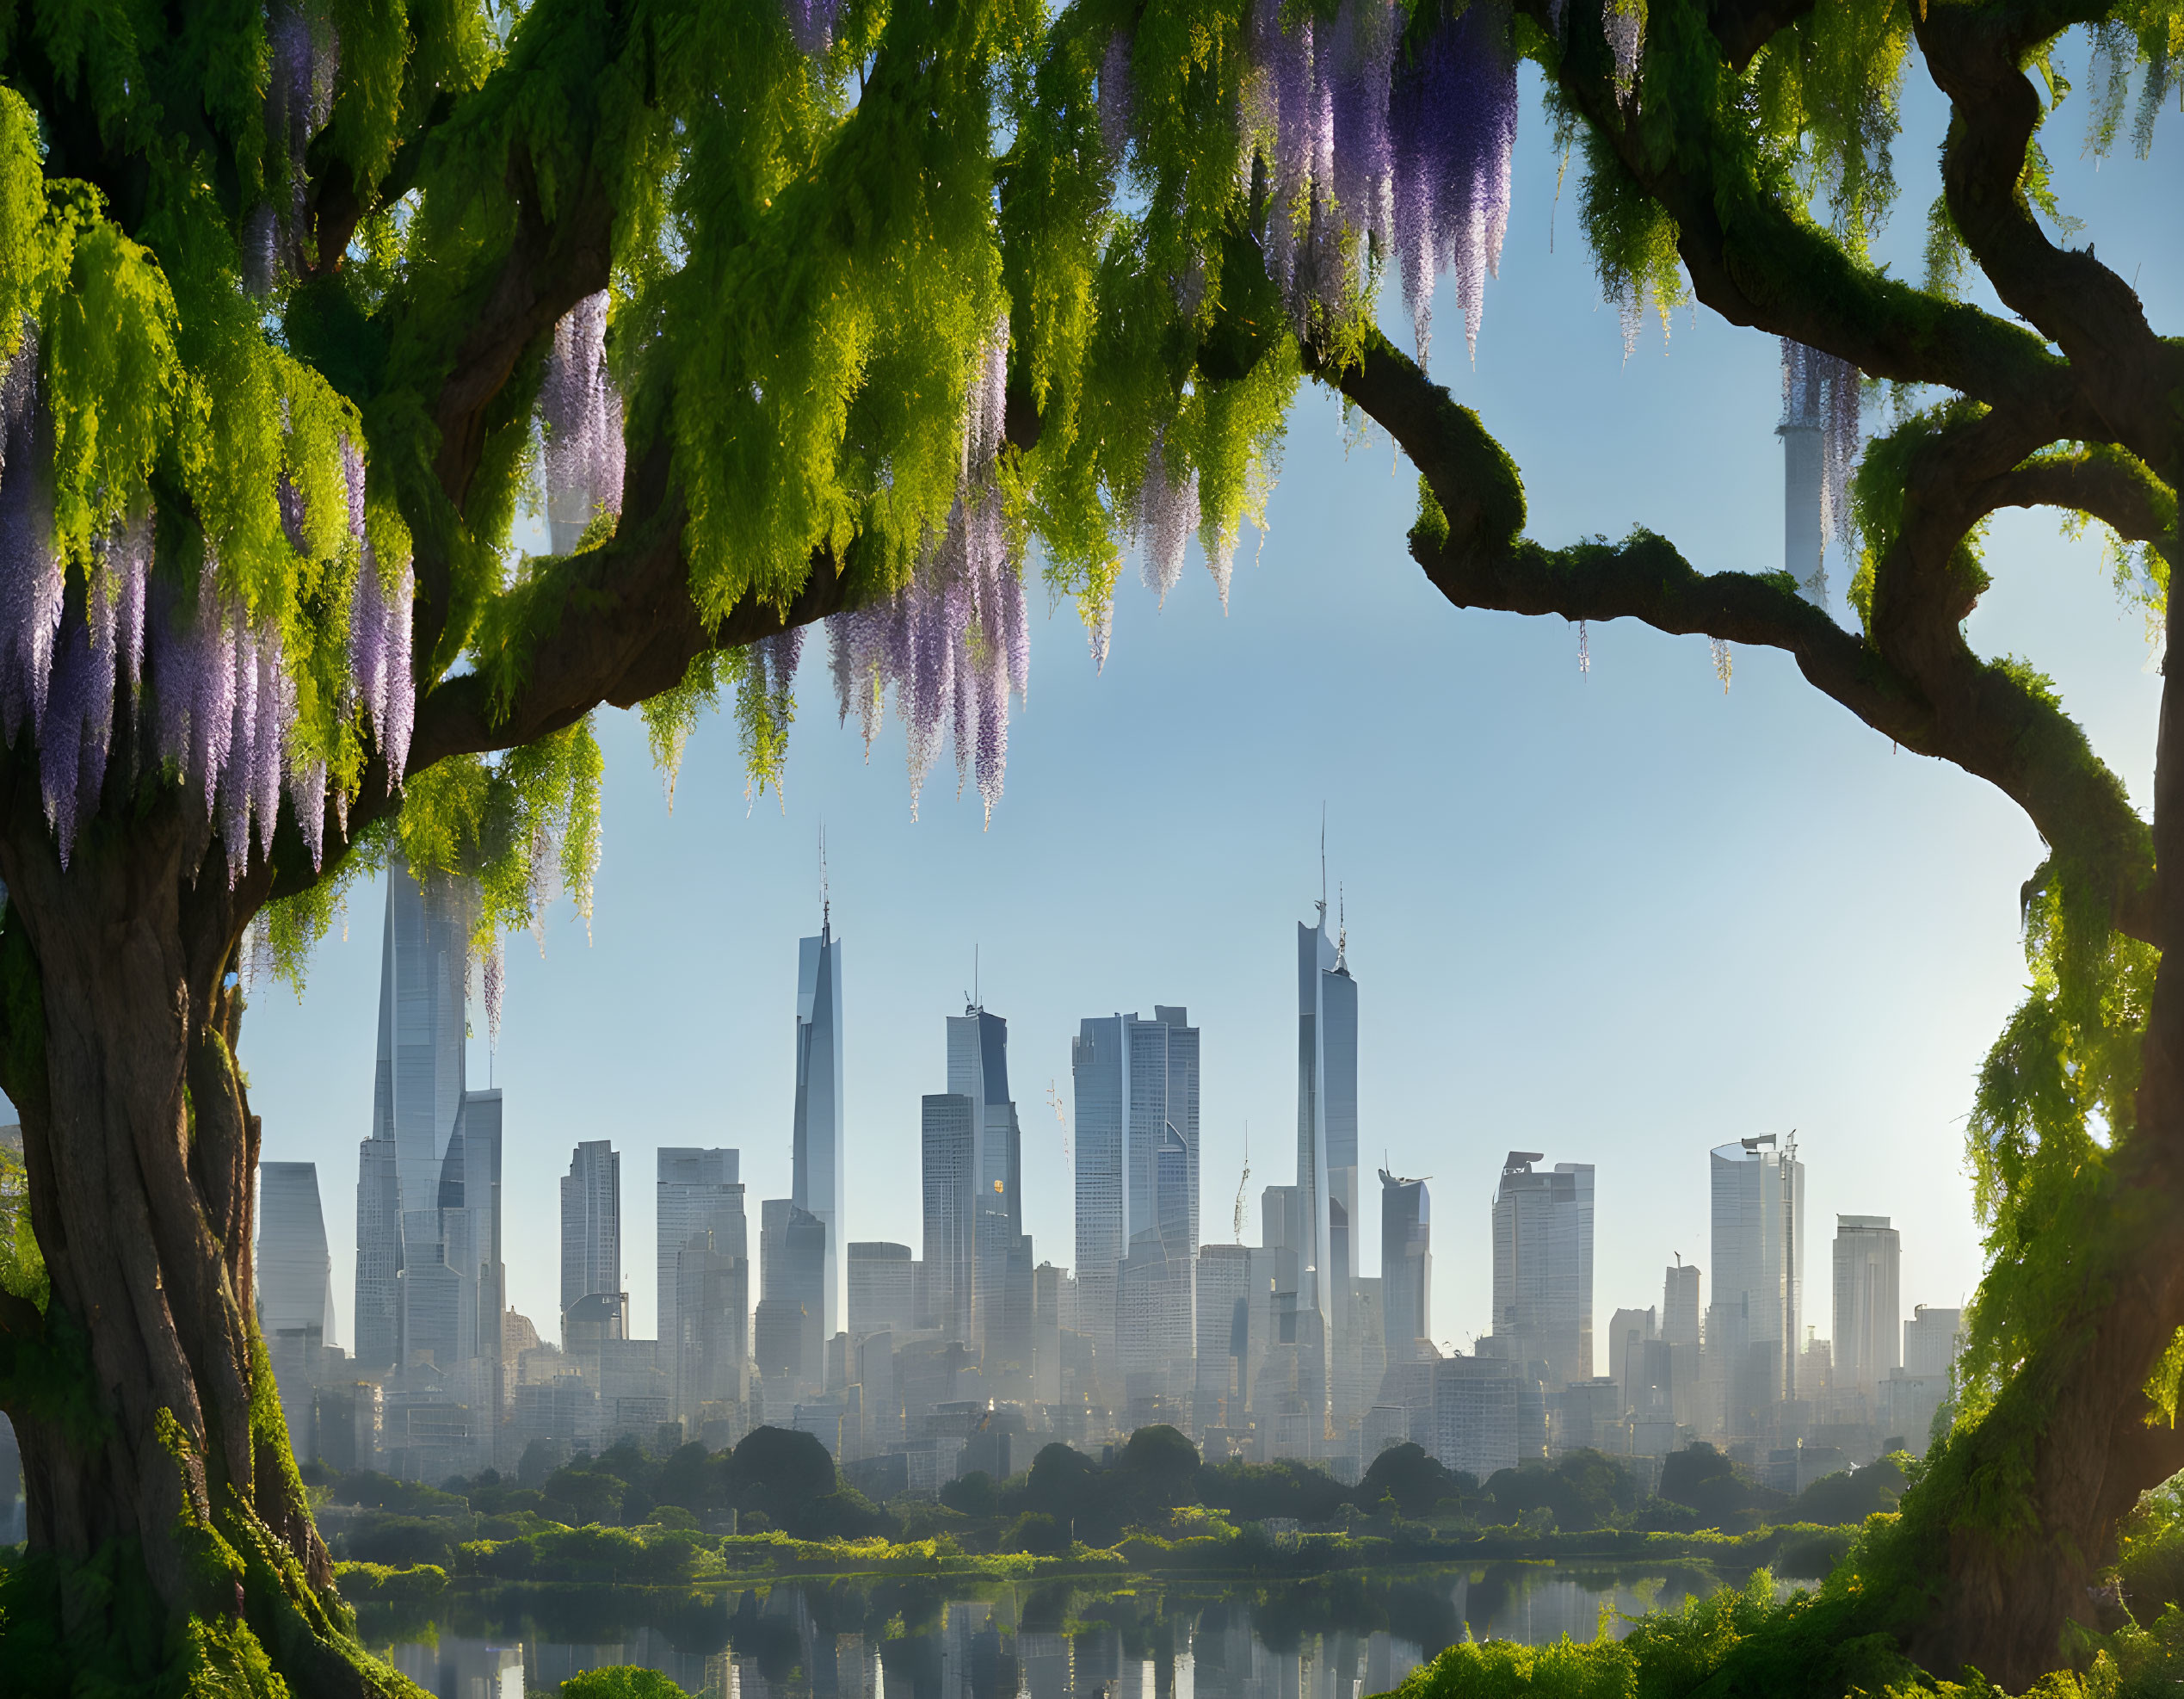 Tranquil cityscape with green branches and purple flowers by calm river